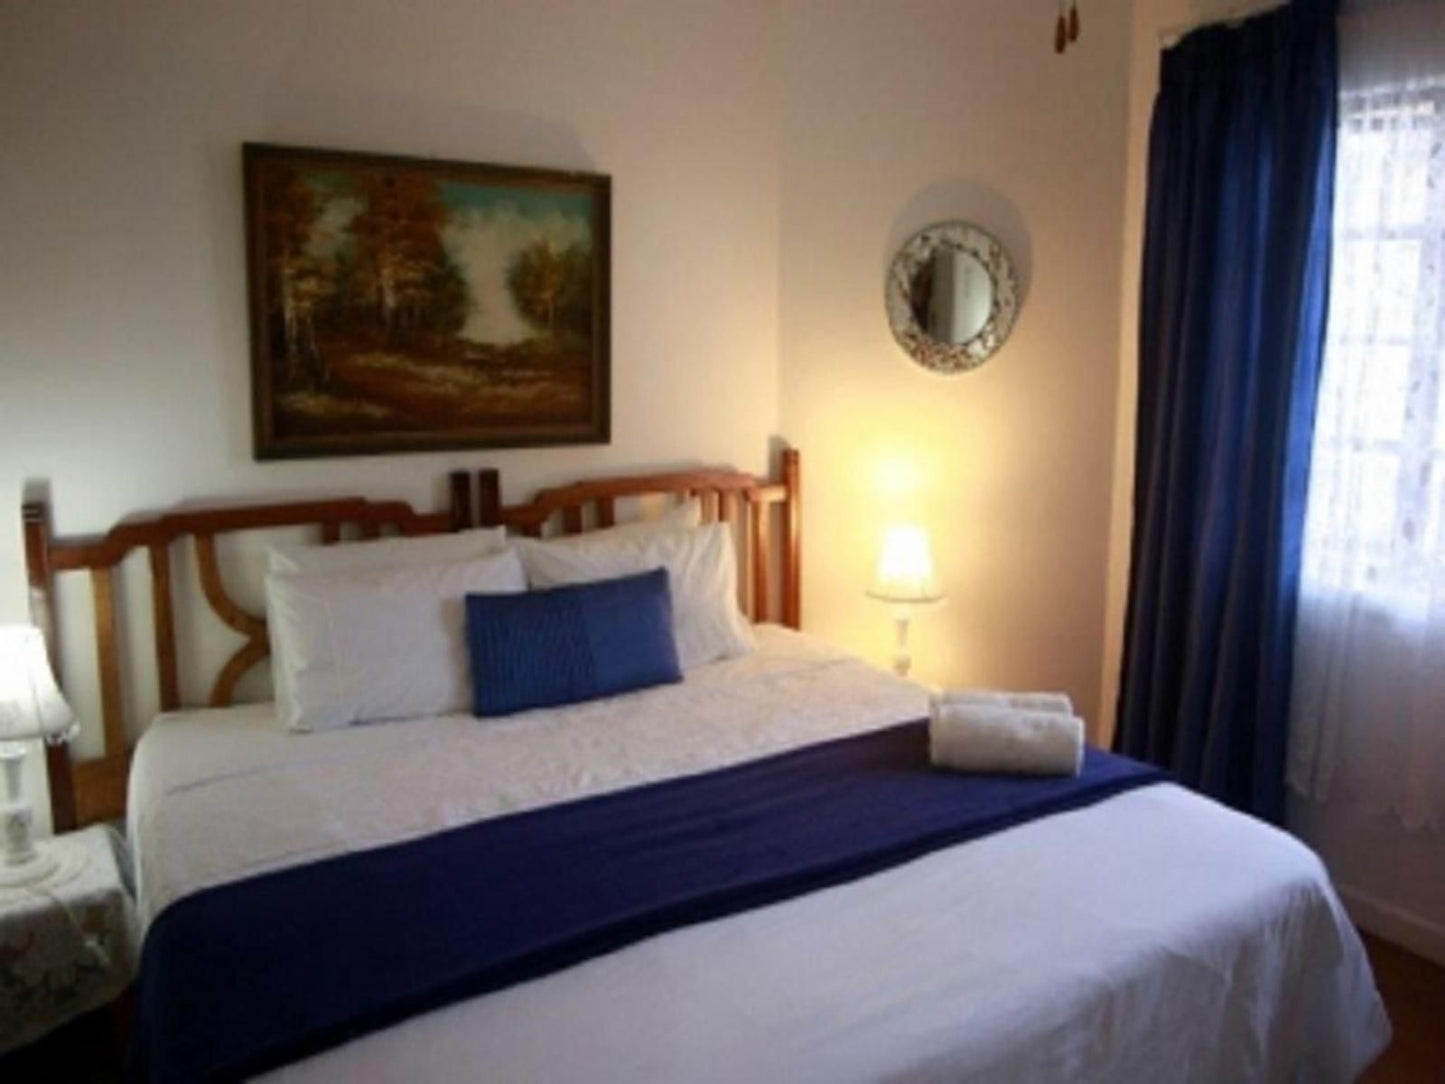 Lighthouse Inn B And B Self Catering The Bluff Durban Kwazulu Natal South Africa Bedroom